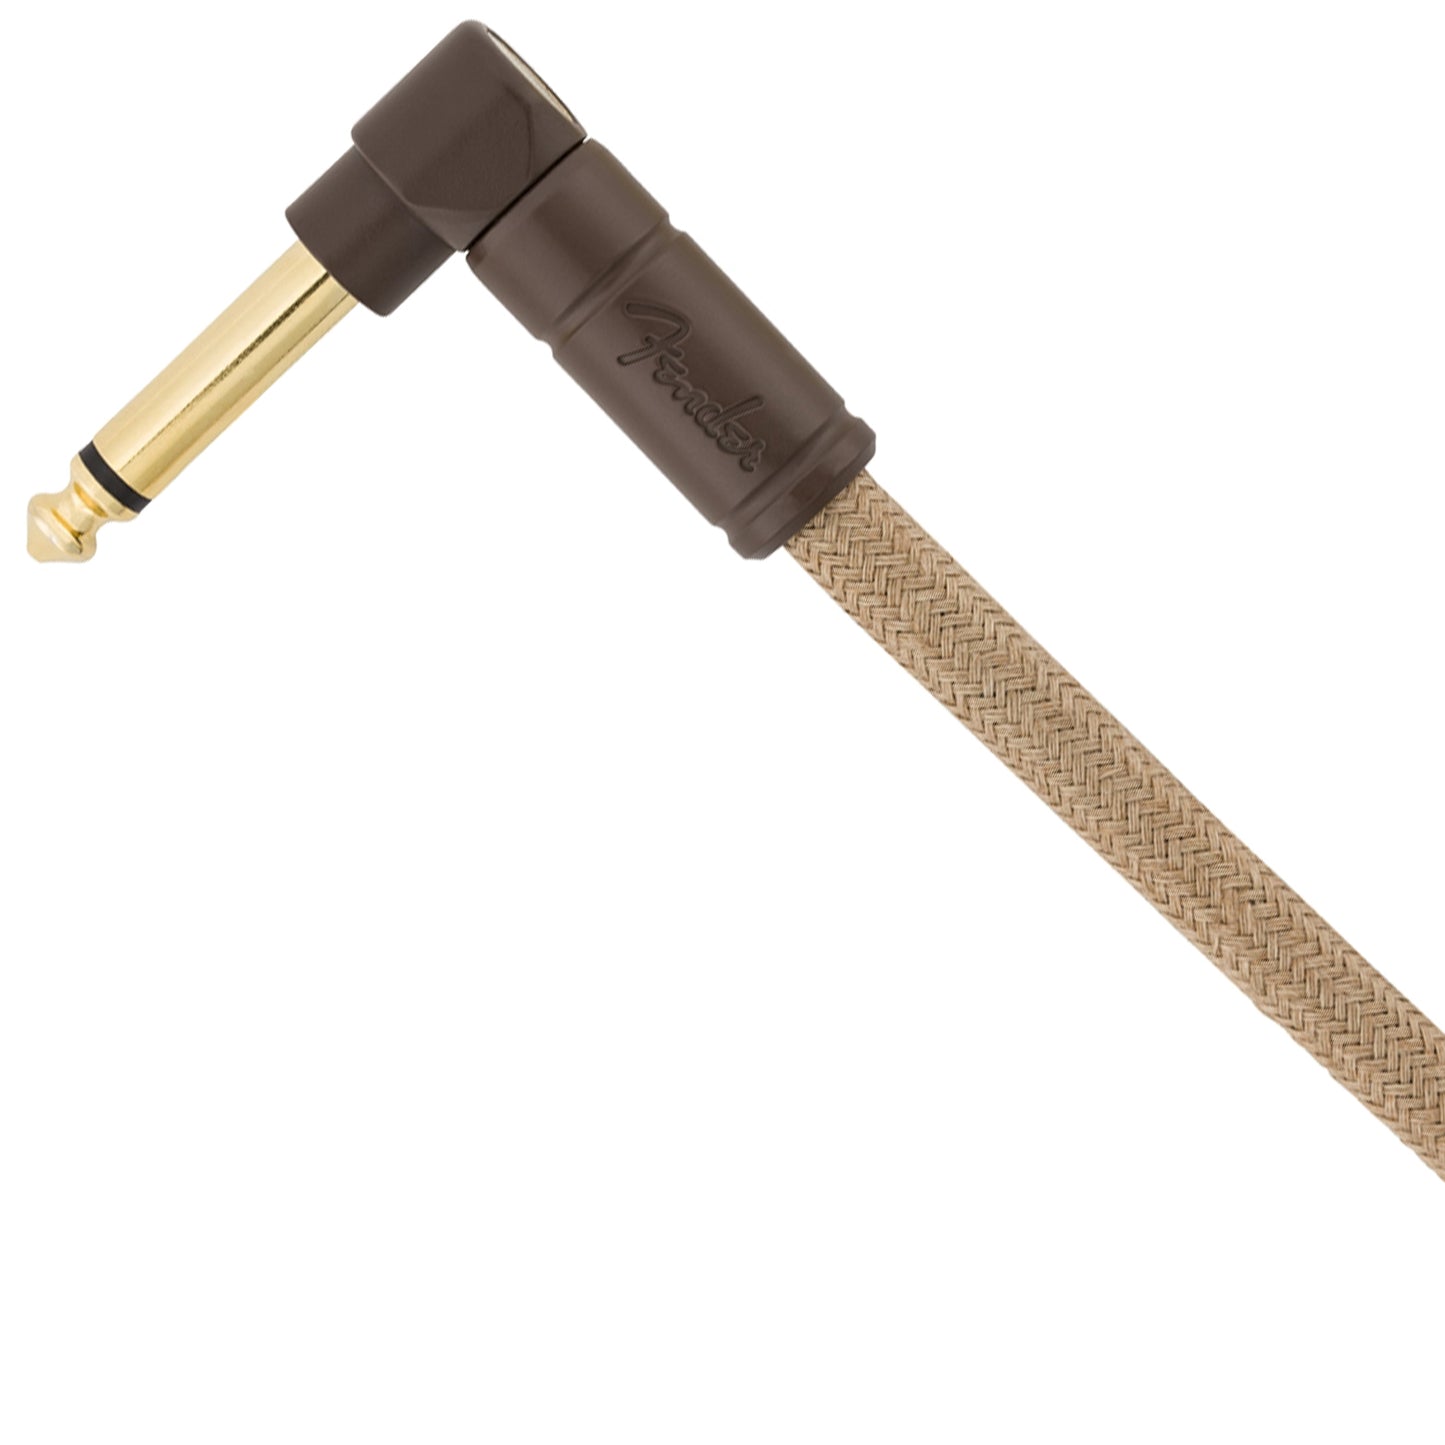 Fender Festival Hemp Instrument Cable 18.6ft Straight-Angle with Gold-Plated 1/4" Connectors, 20AWG (Natural, Green)